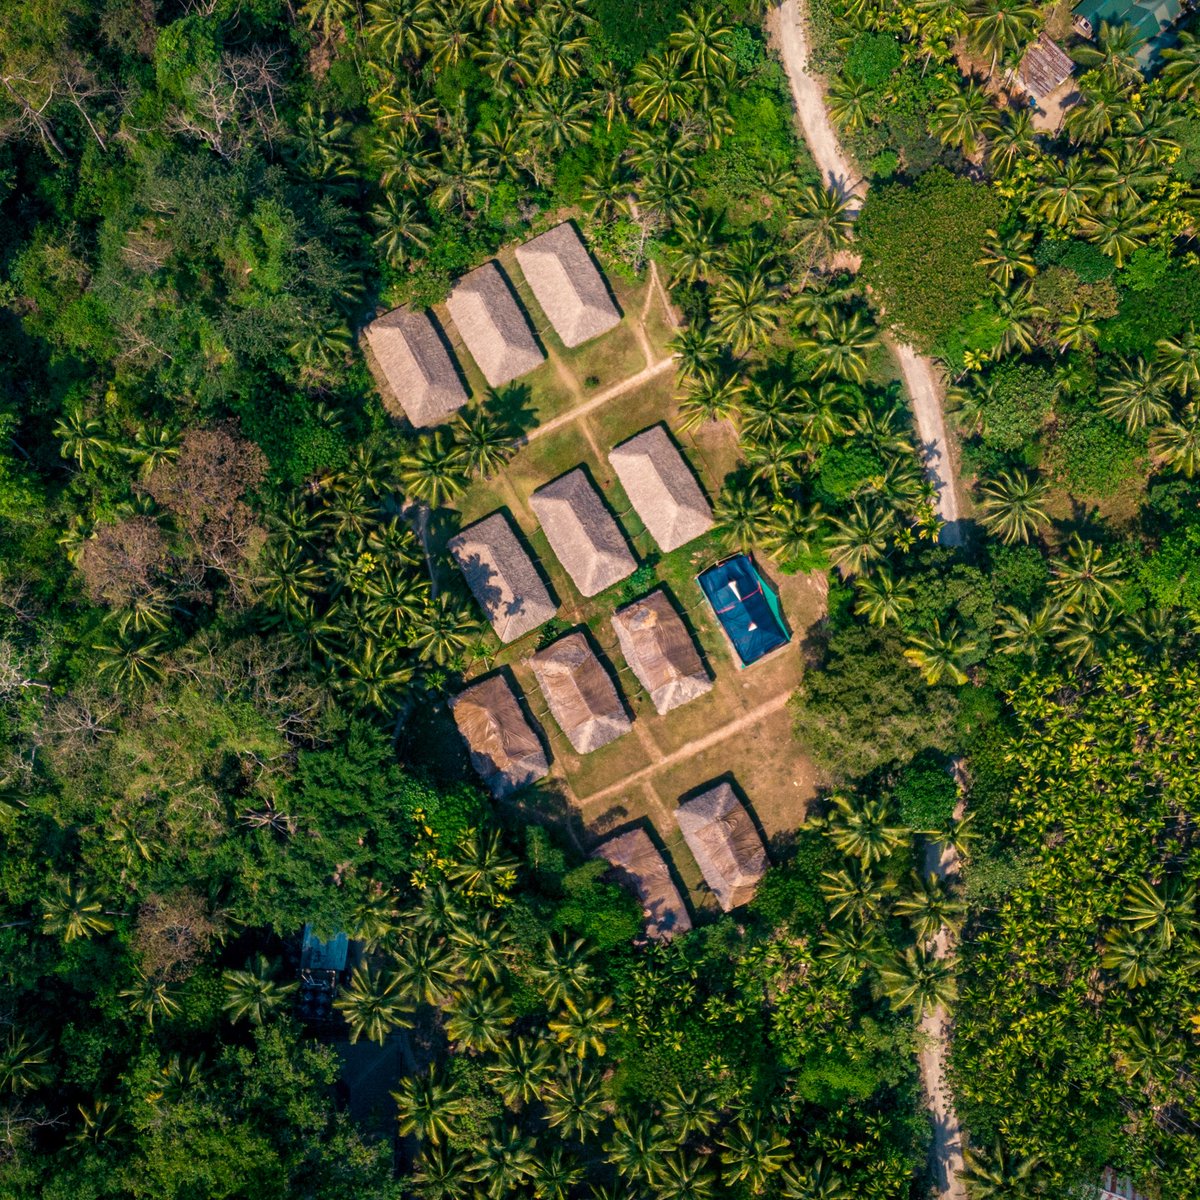 Experience island living at its finest with our Tented #Cottage at Barefoot at Havelock. Immerse yourself in luxury with this spacious room and unwind while you are surrounded by lush greenery.

Book your stay via the link in bio. 🏕️

#Havelock #Travel #Island #Resorts #Andamans